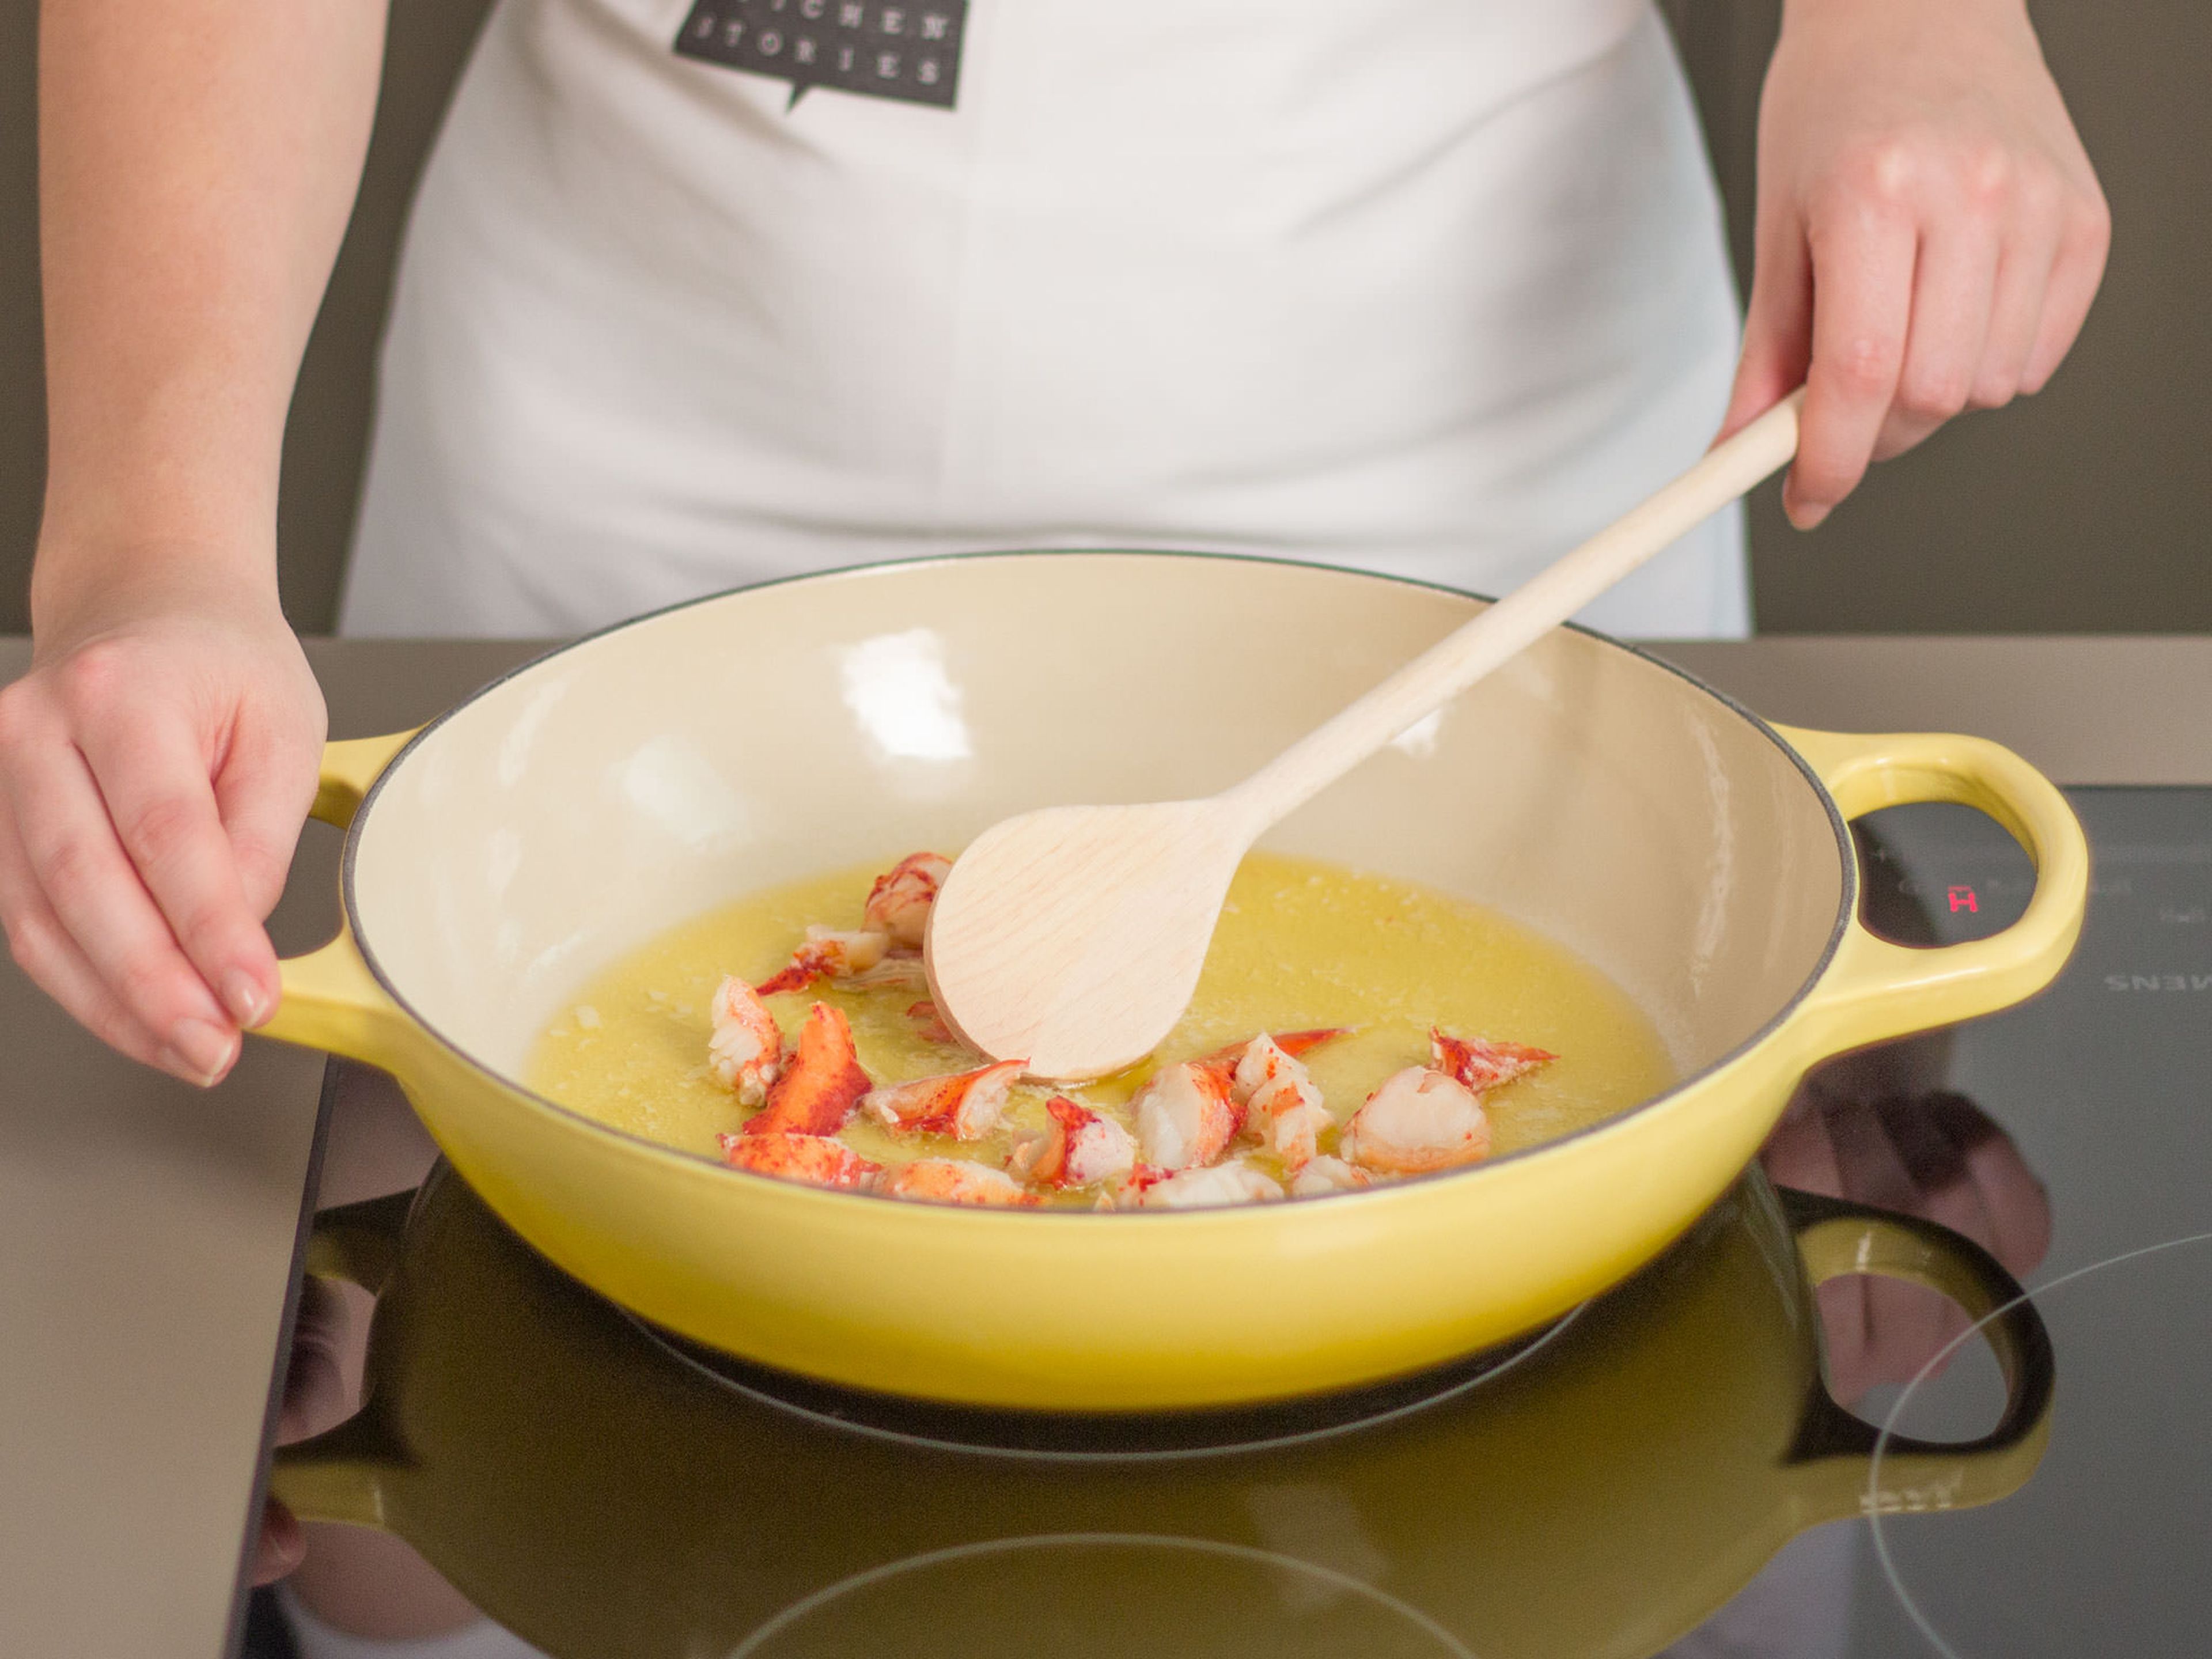 In a large frying pan, sauté lobster in butter over medium heat for approx. 3 – 5 min.